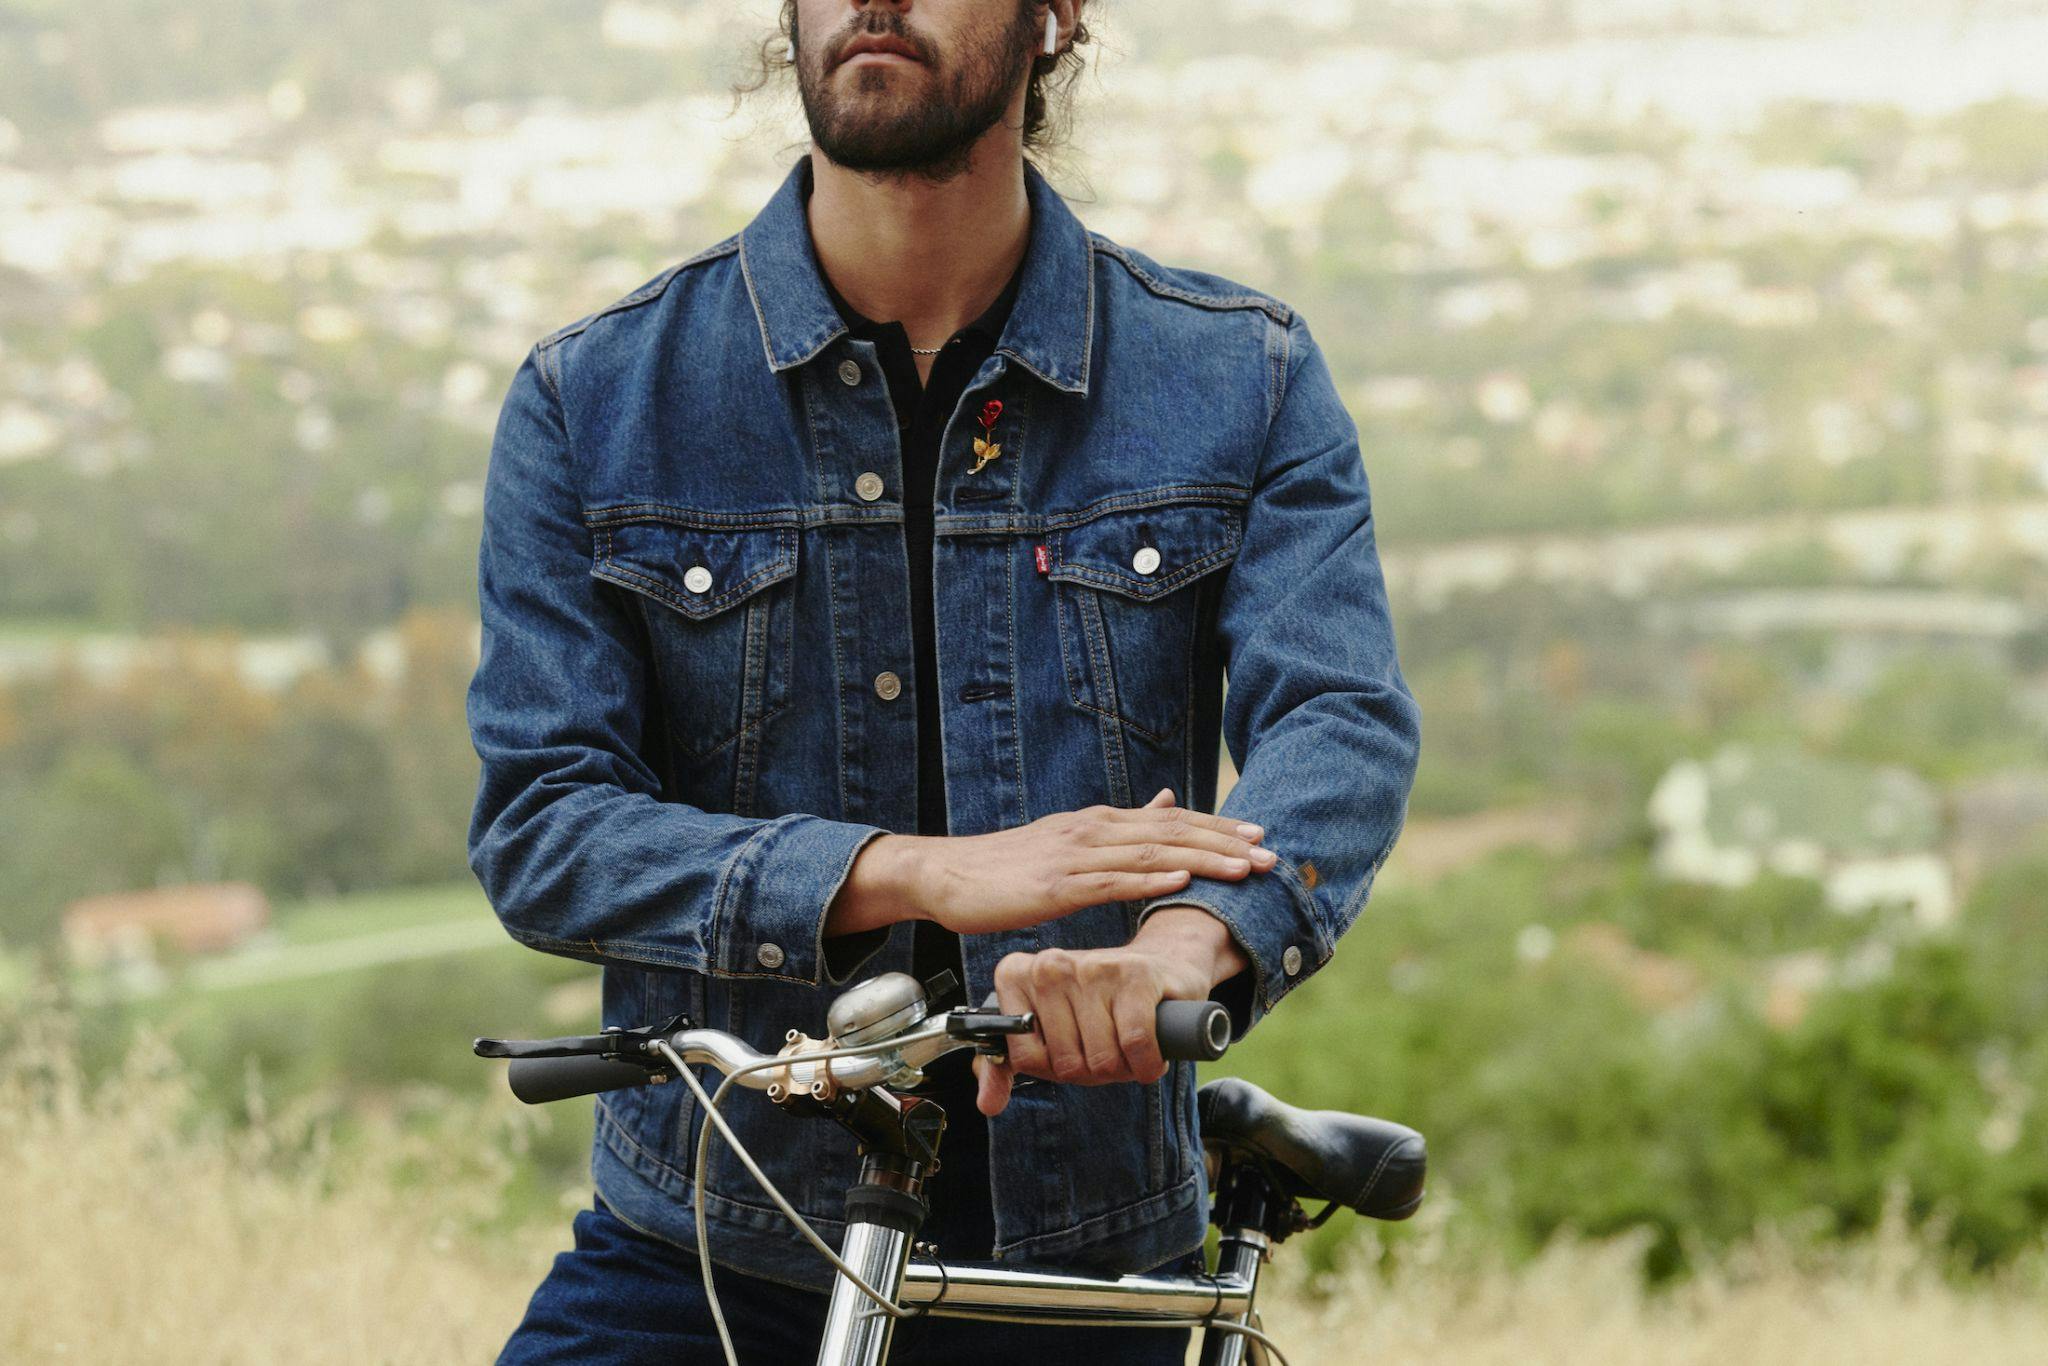 featured image - Levi’s and Google to Collab on Advanced Tech for Outerwear